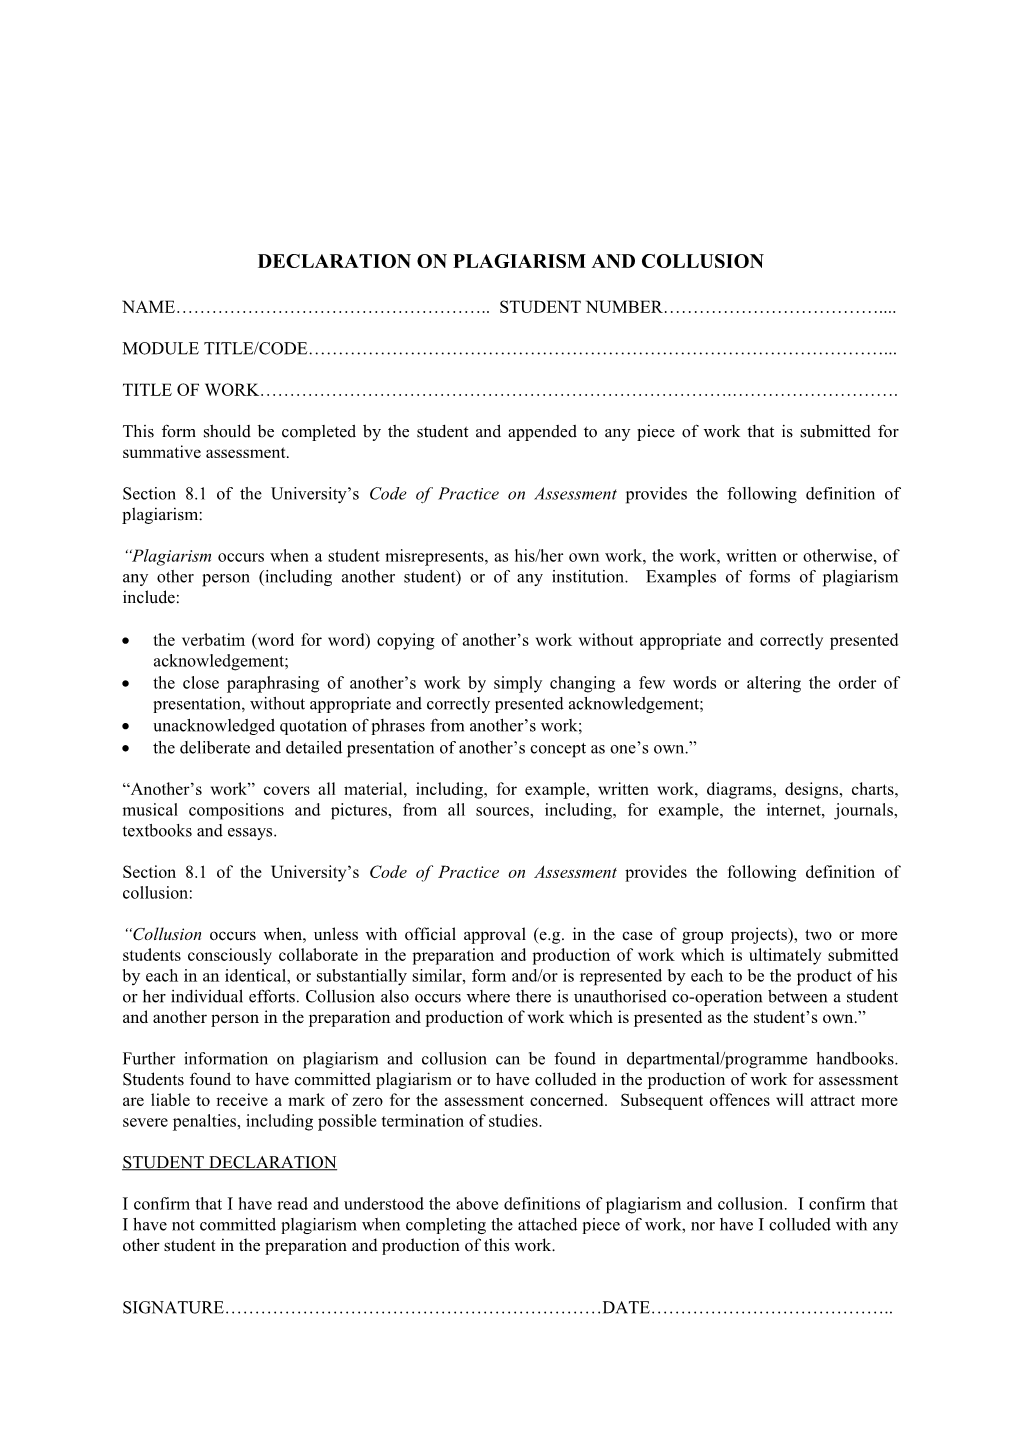 Declaration on Plagiarism and Collusion